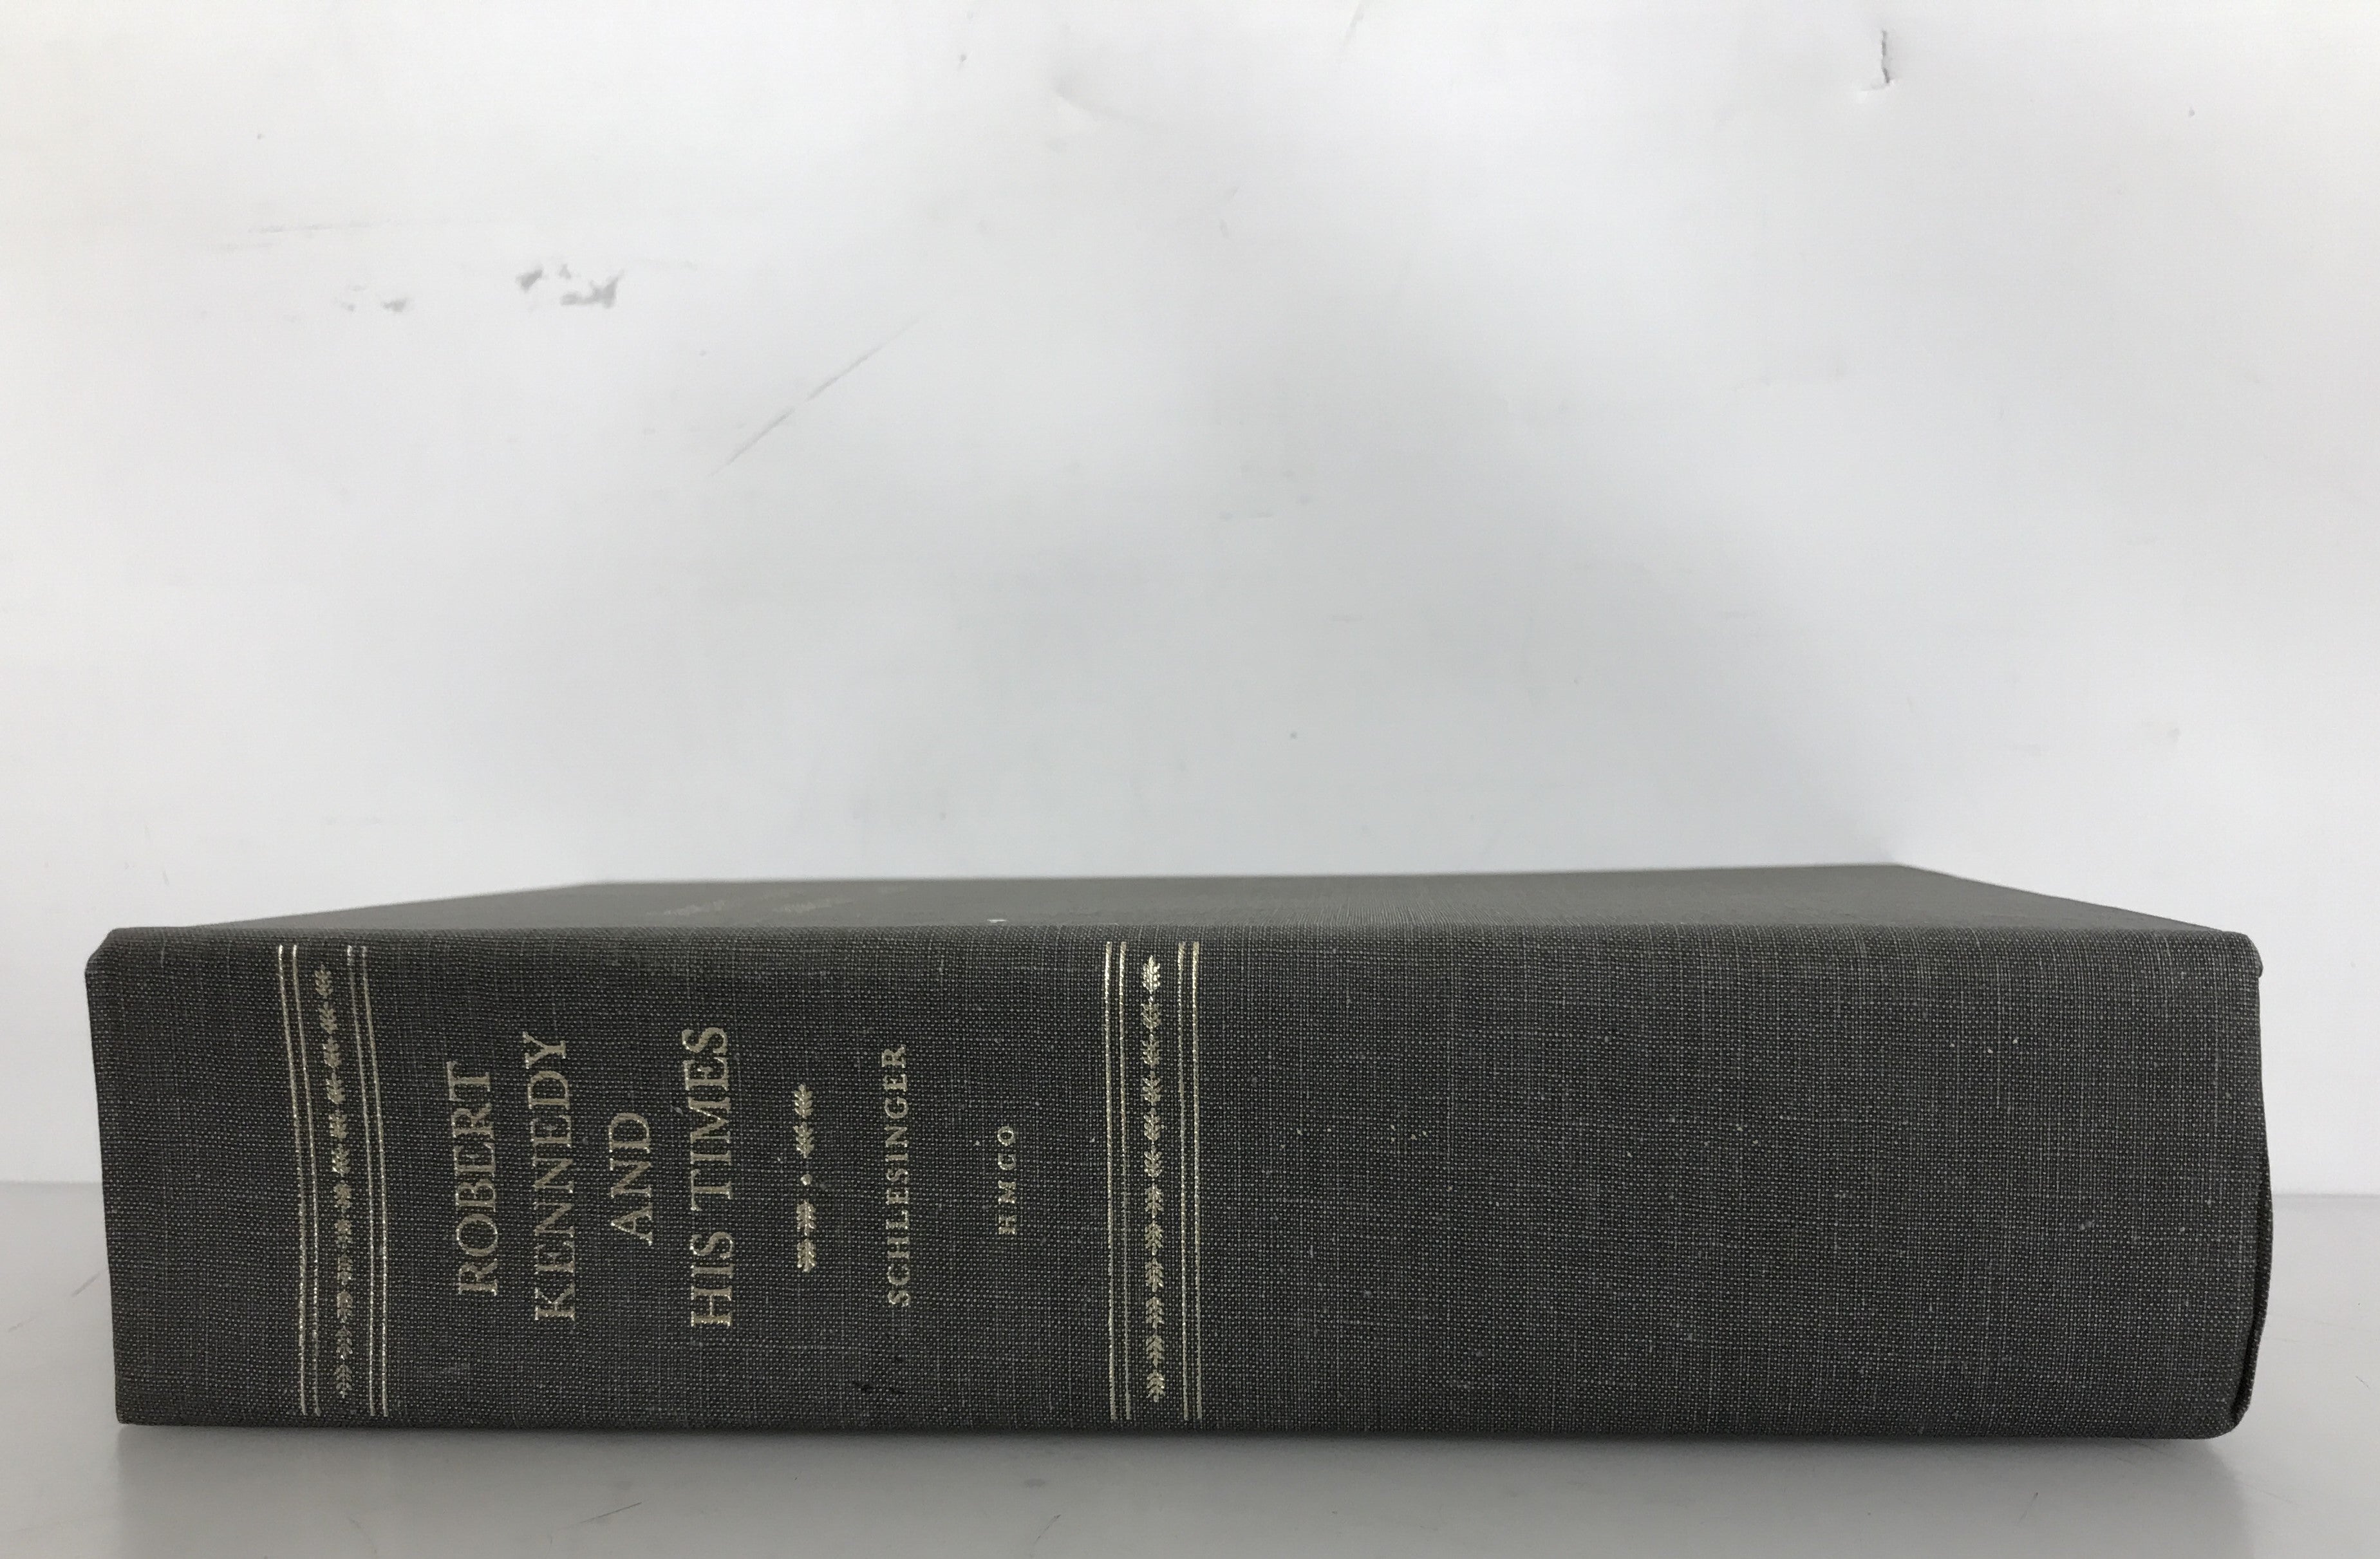 Robert Kennedy and His Times by Arthur Schlesinger First Edition 1978 HC